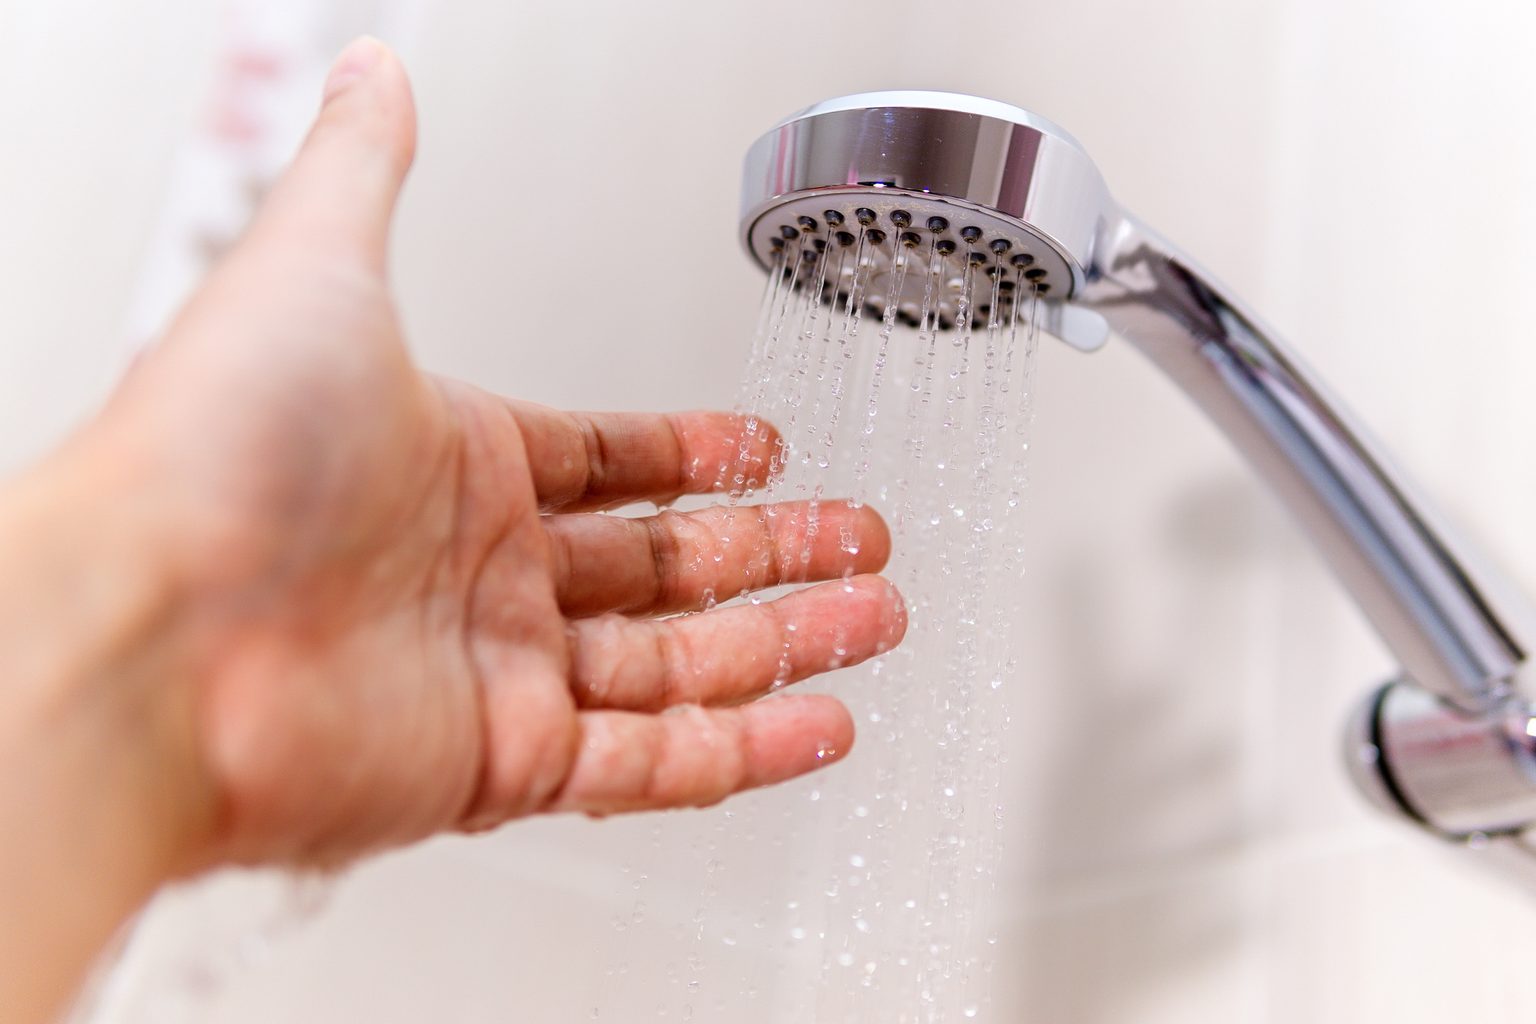 Heres How Often You Should Really Shower Say Doctors The Healthy Readers Digest 